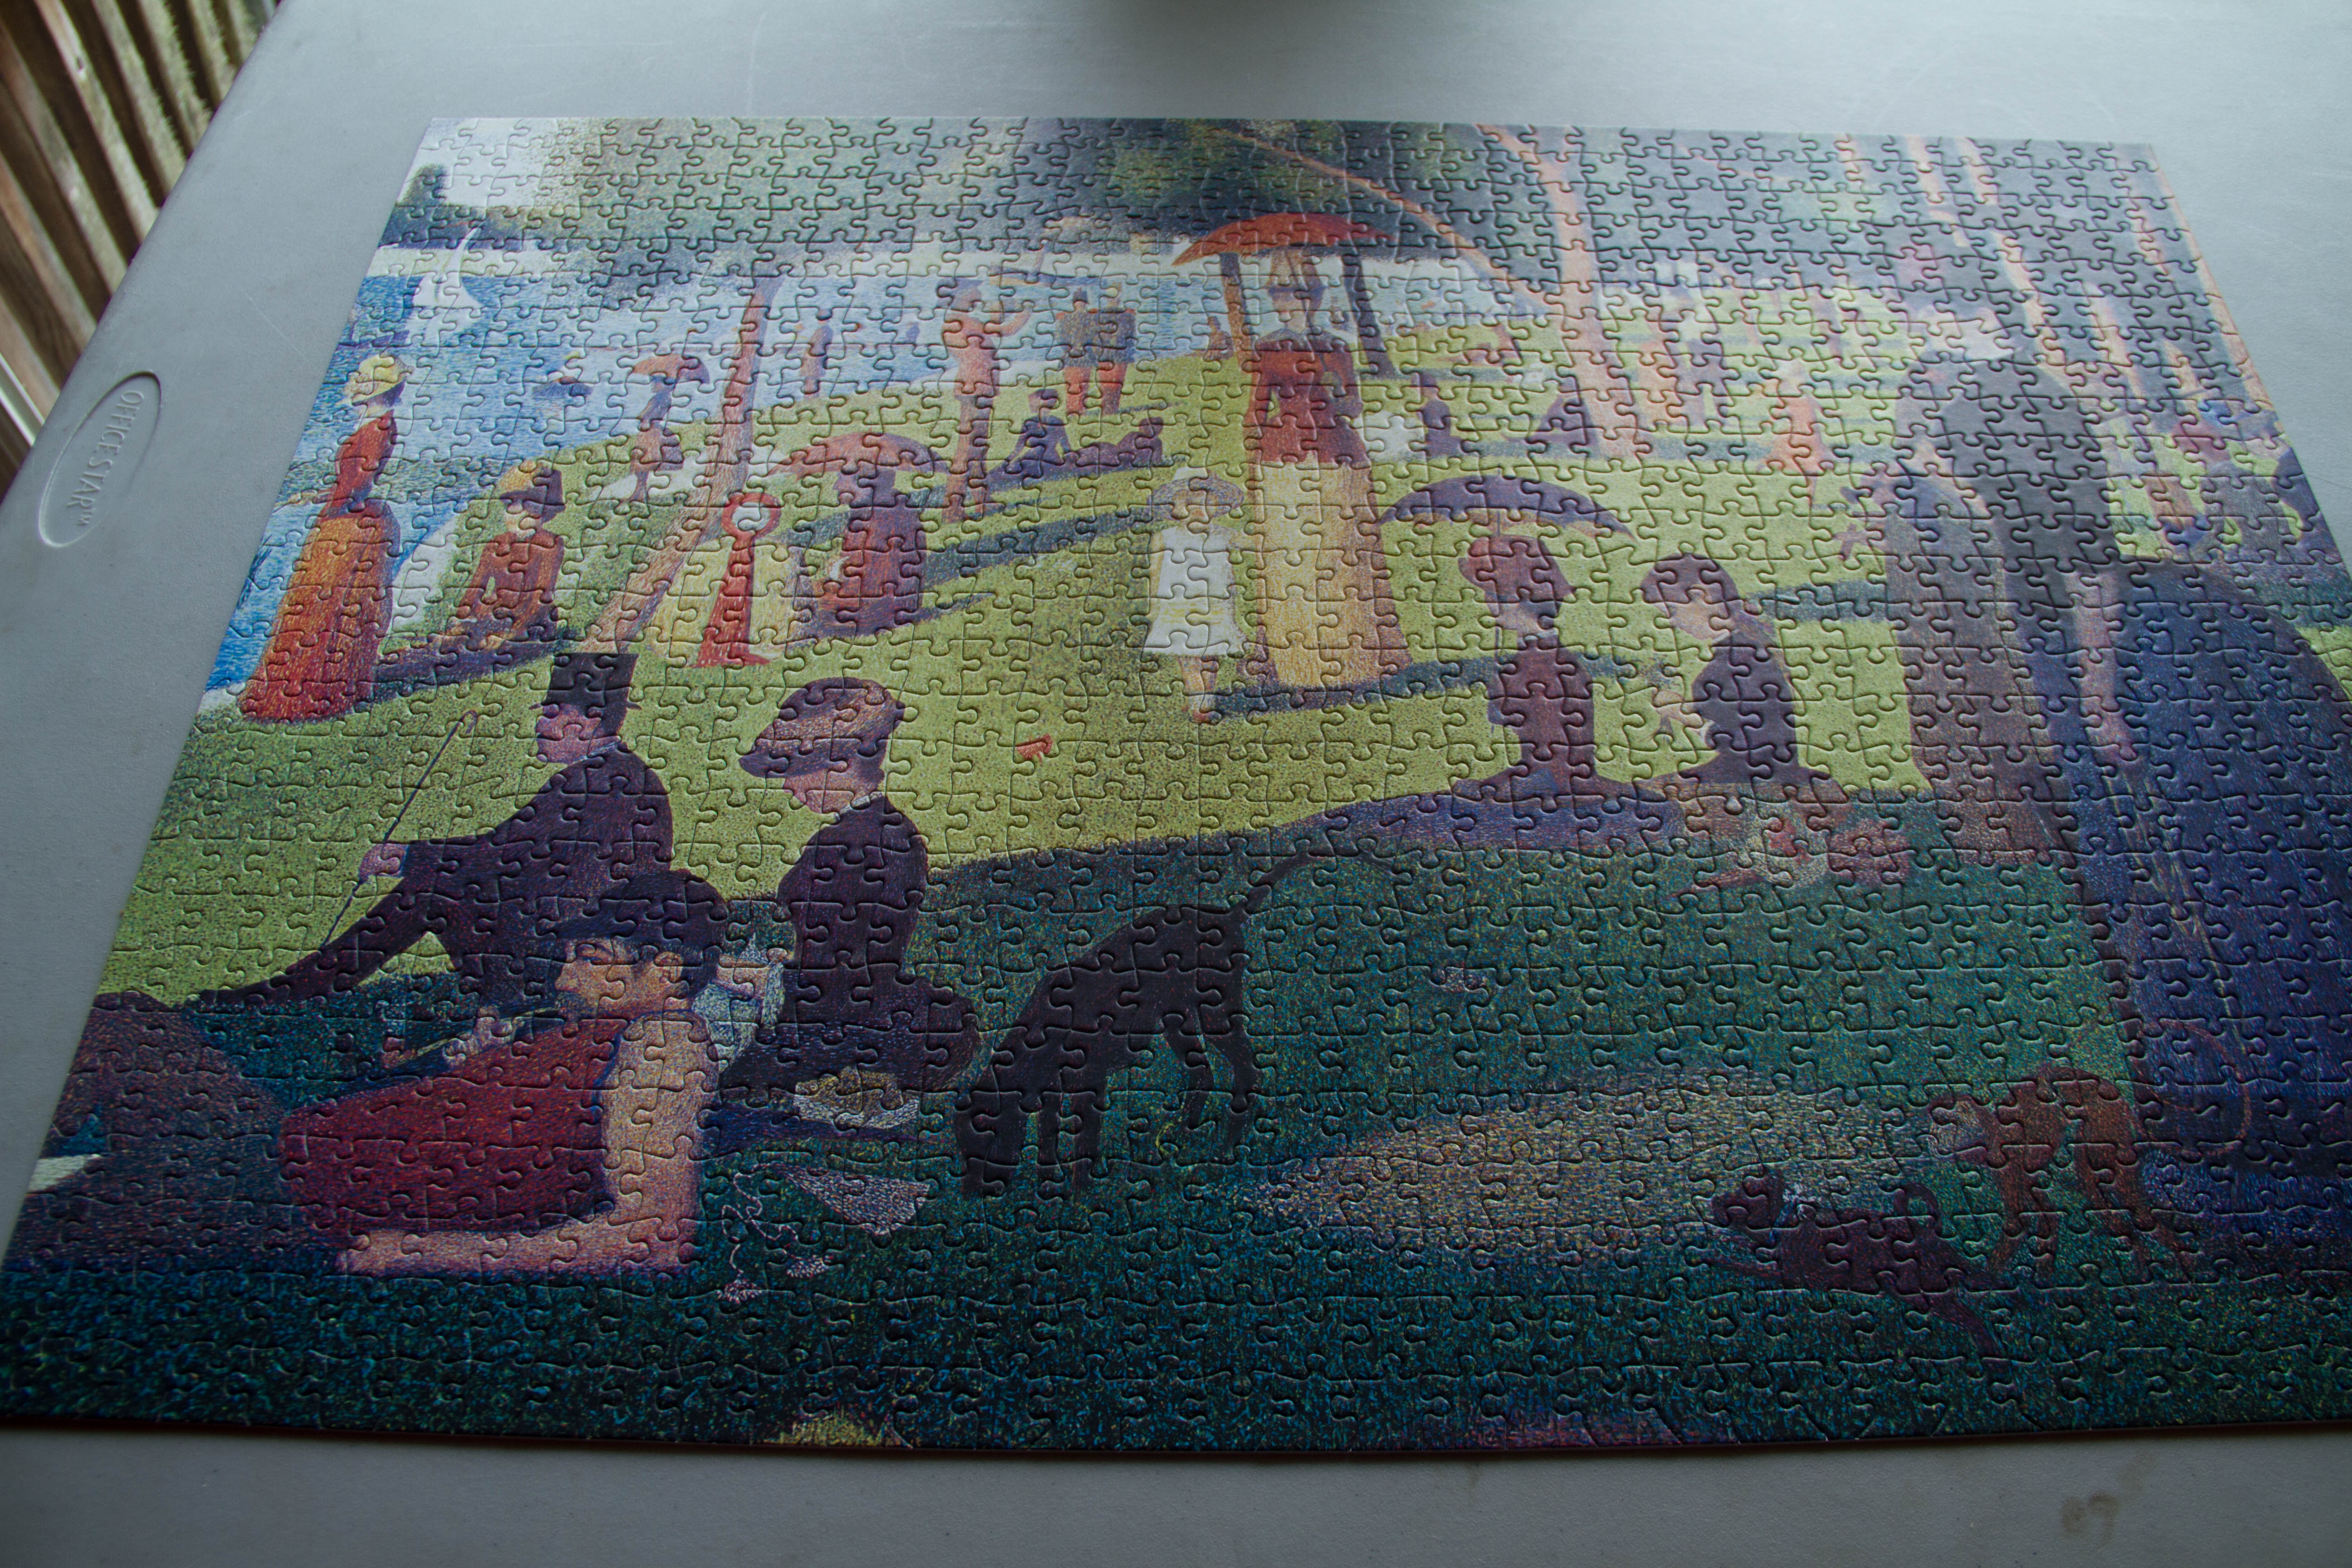 This 1000 piece jigsaw of a pointillist painting by Georges Seurat was particularly difficult to do. 